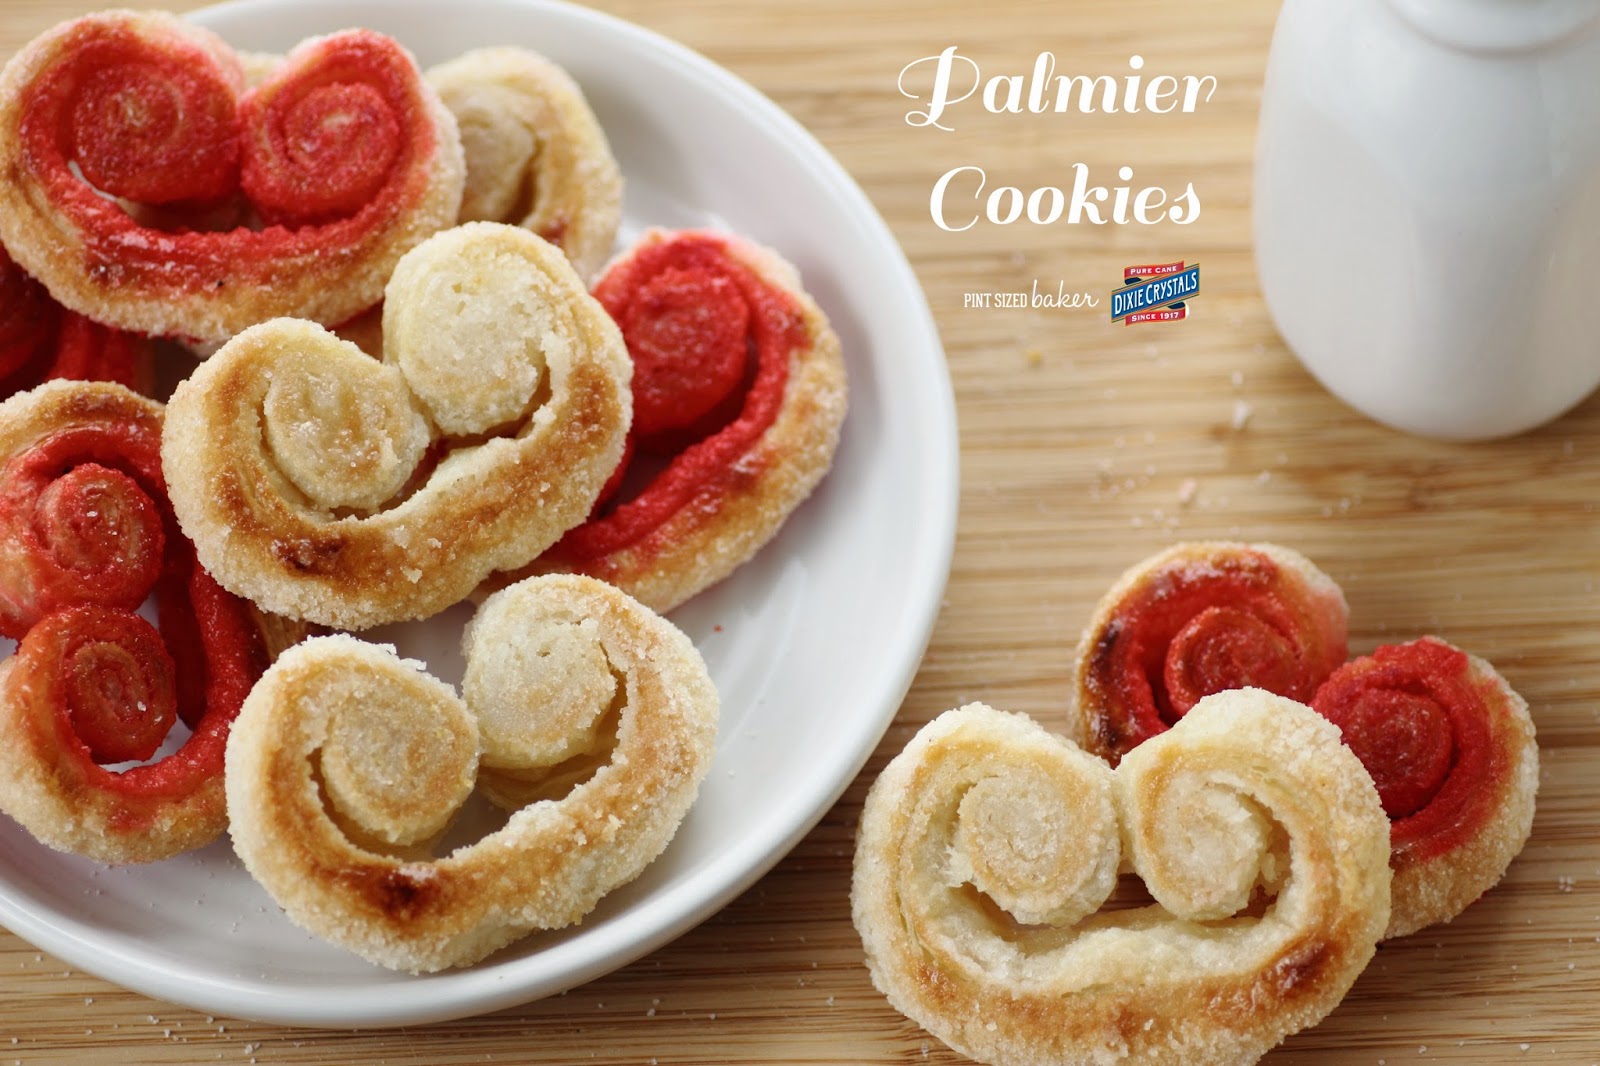 Homemade Palmier Cookies have only two ingredients and are ready in under 20 minutes!